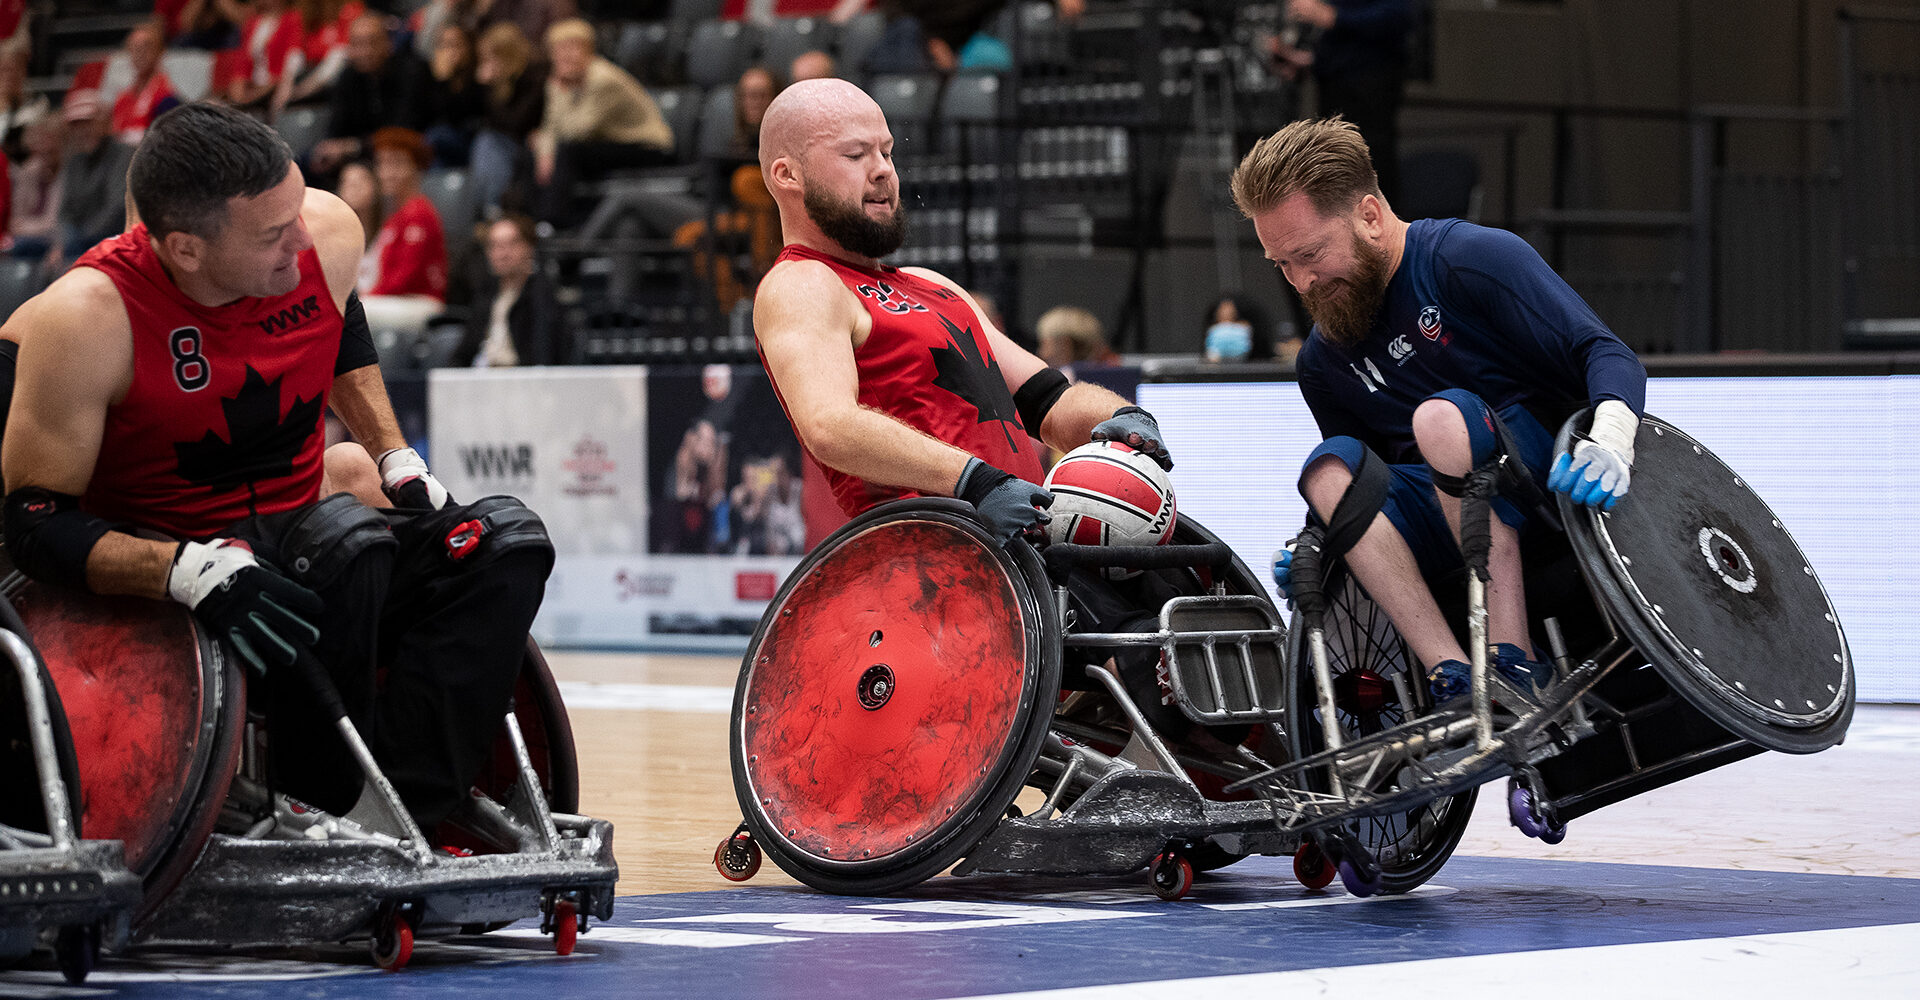 Heartbreaking loss for Canada in 2022 Wheelchair Rugby World Championship quarterfinals